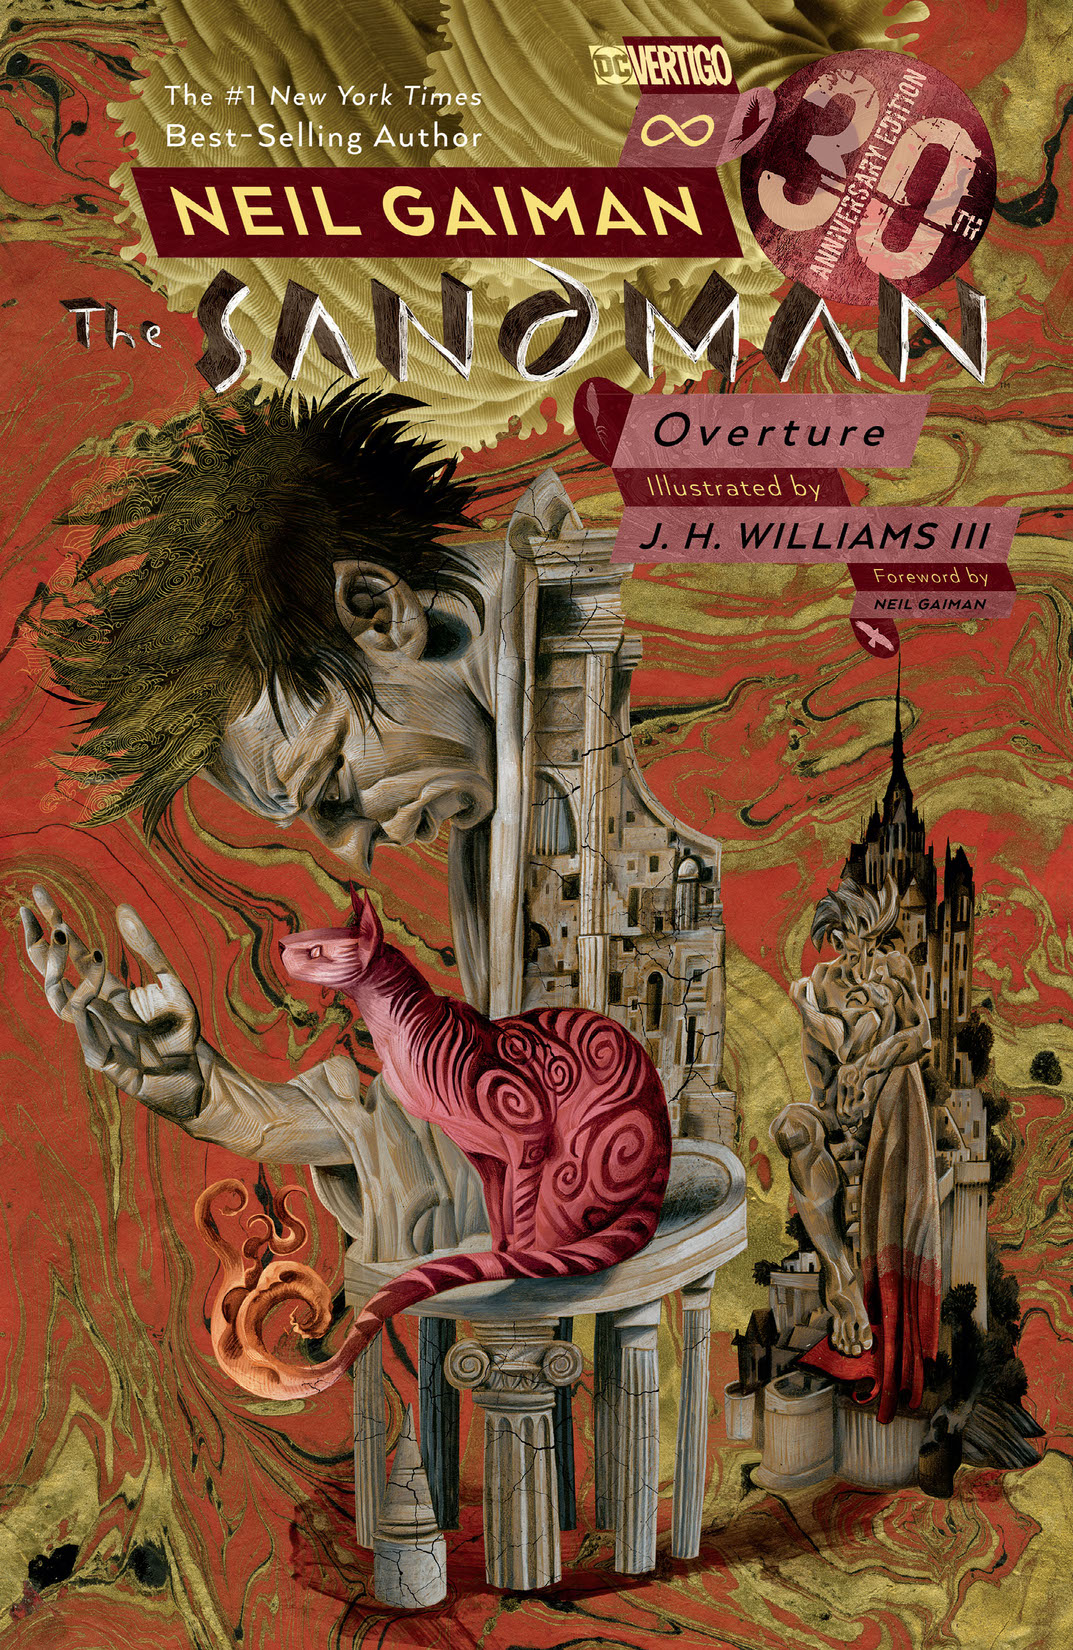 The Sandman: Overture 30th Anniversary Edition preview images